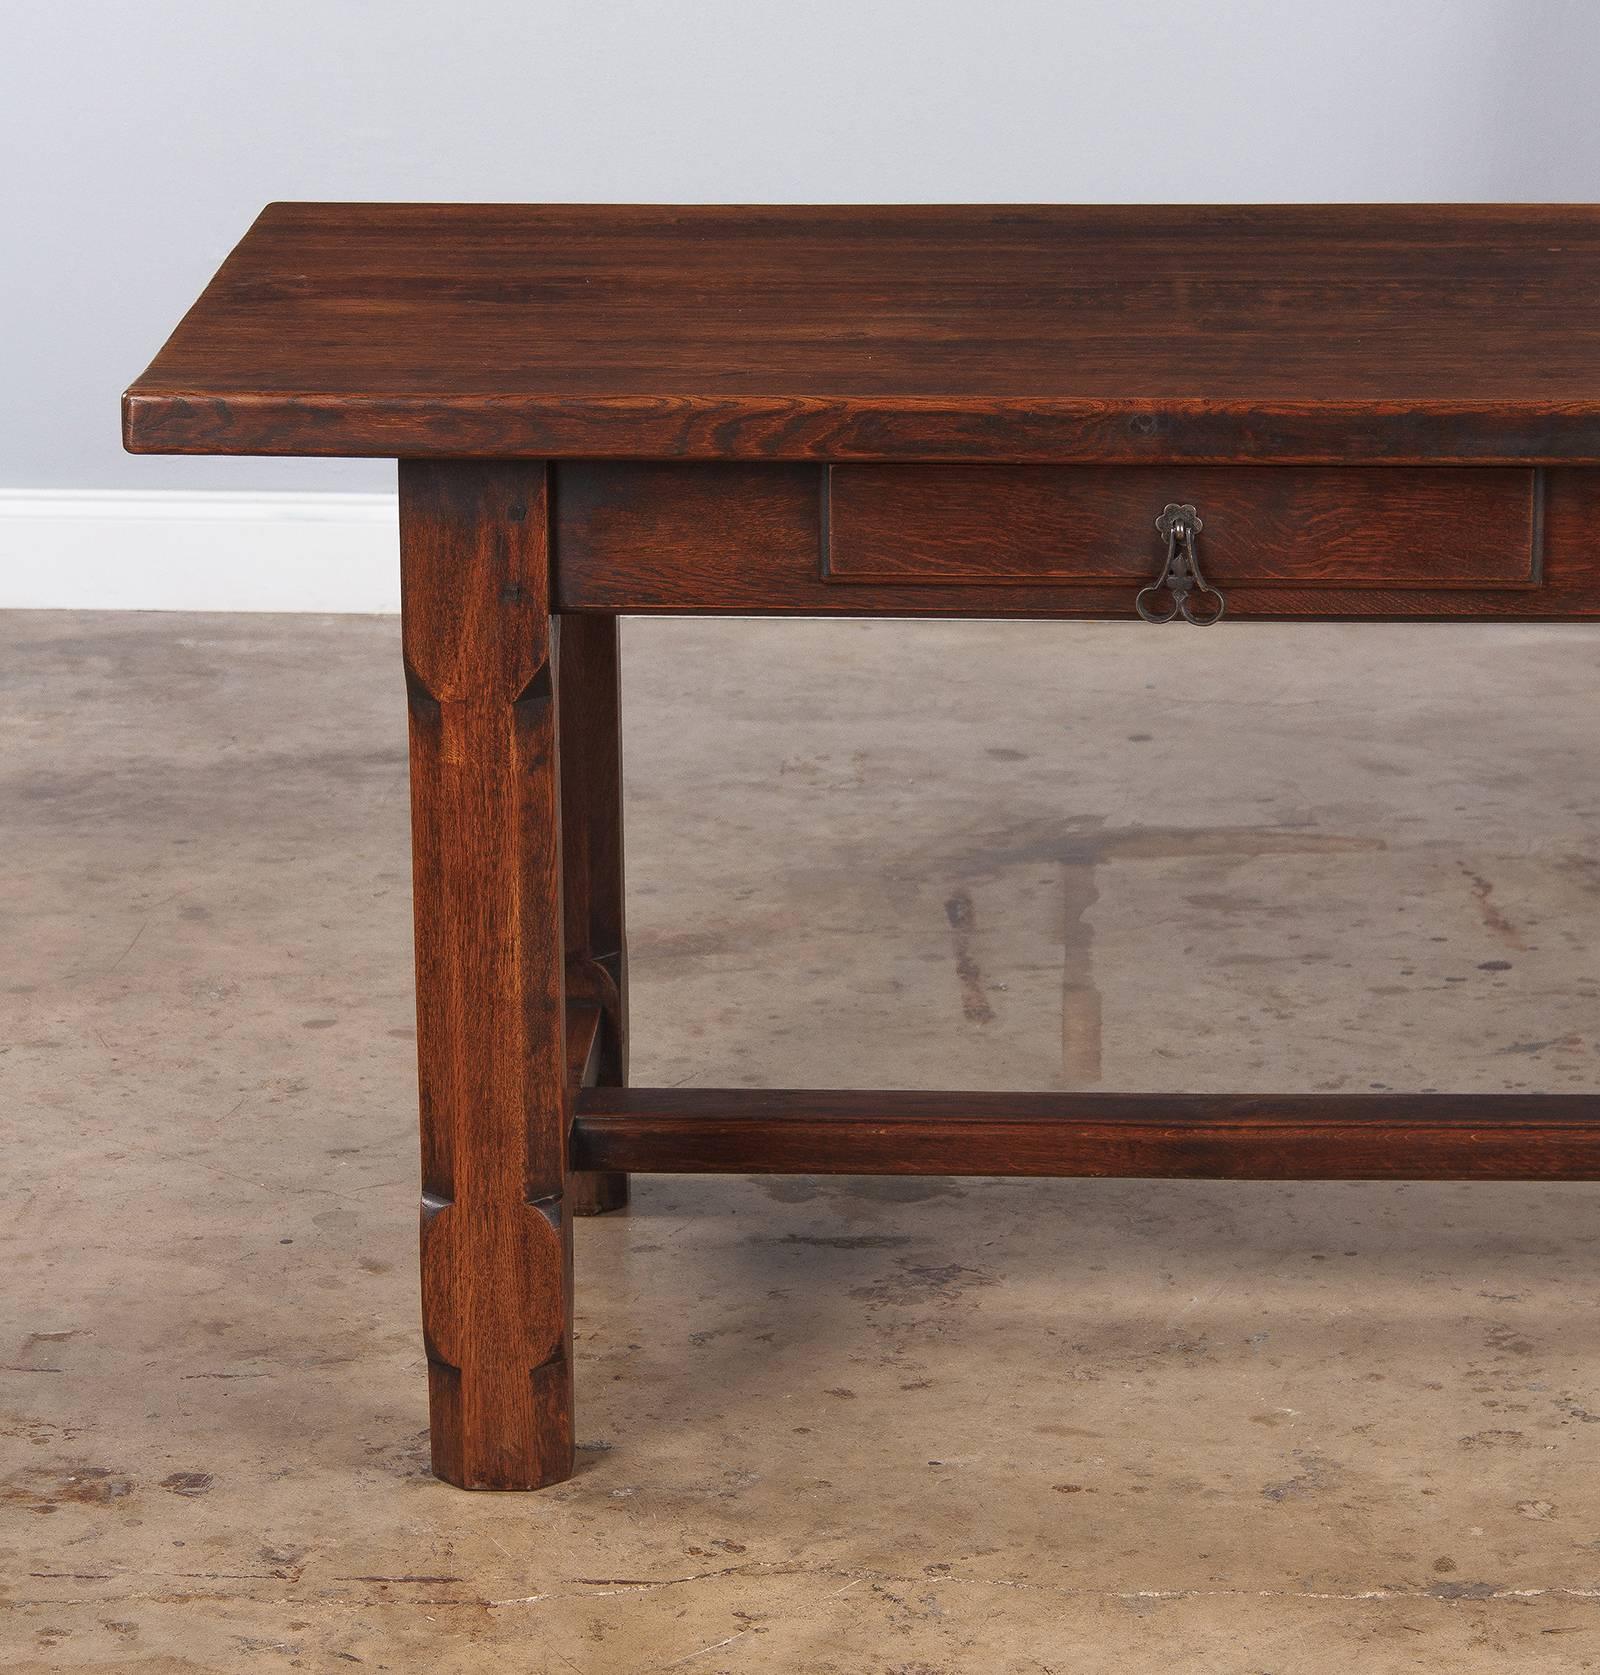 Country French Oak Farm Table or Desk, Early 1900s (Metall)